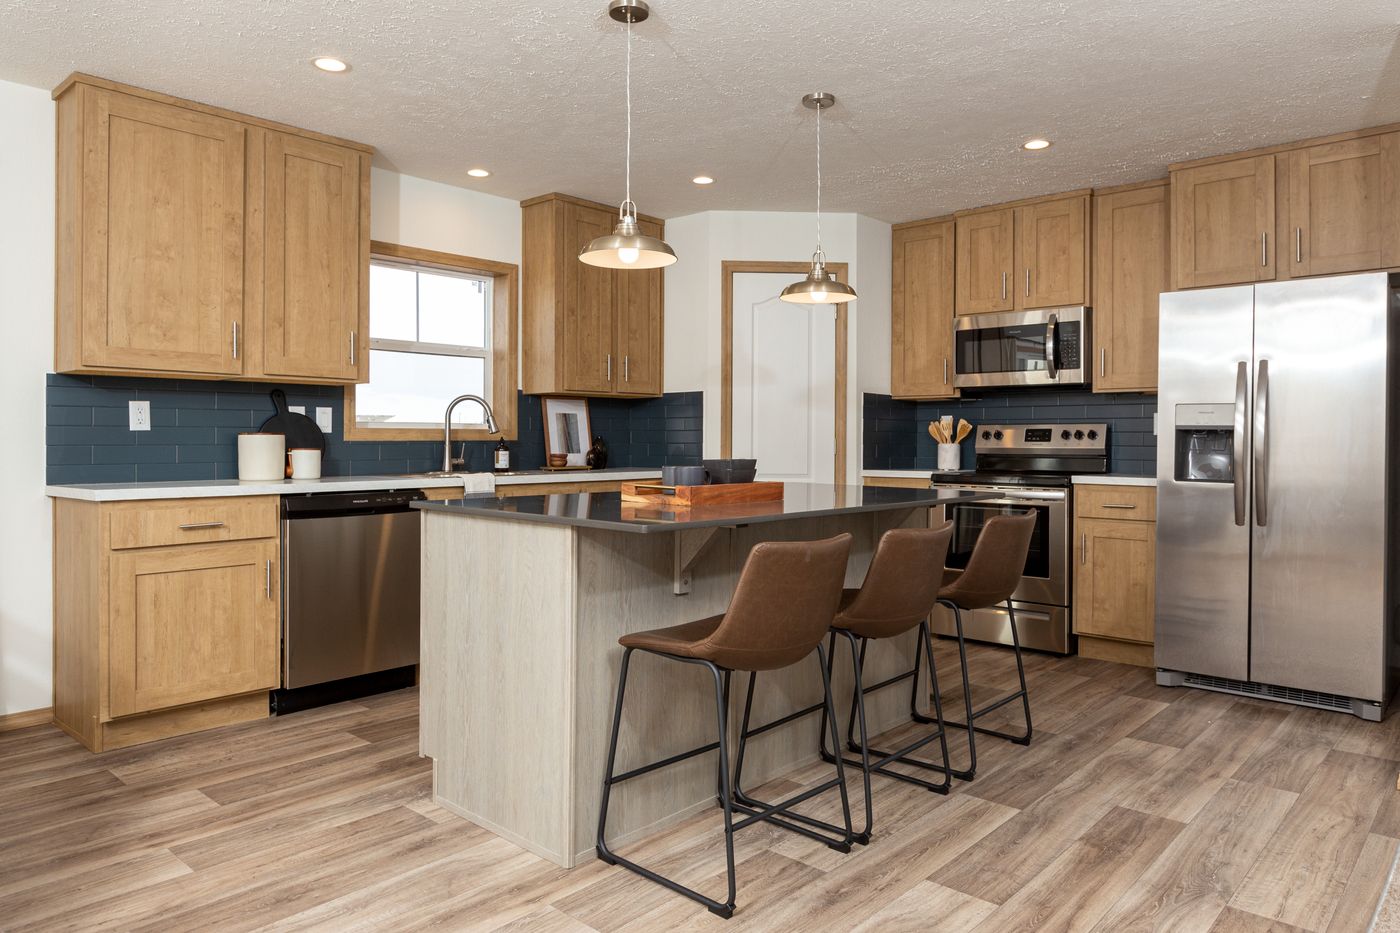 The THE ANTHONY Kitchen. This Manufactured Mobile Home features 2 bedrooms and 2 baths.